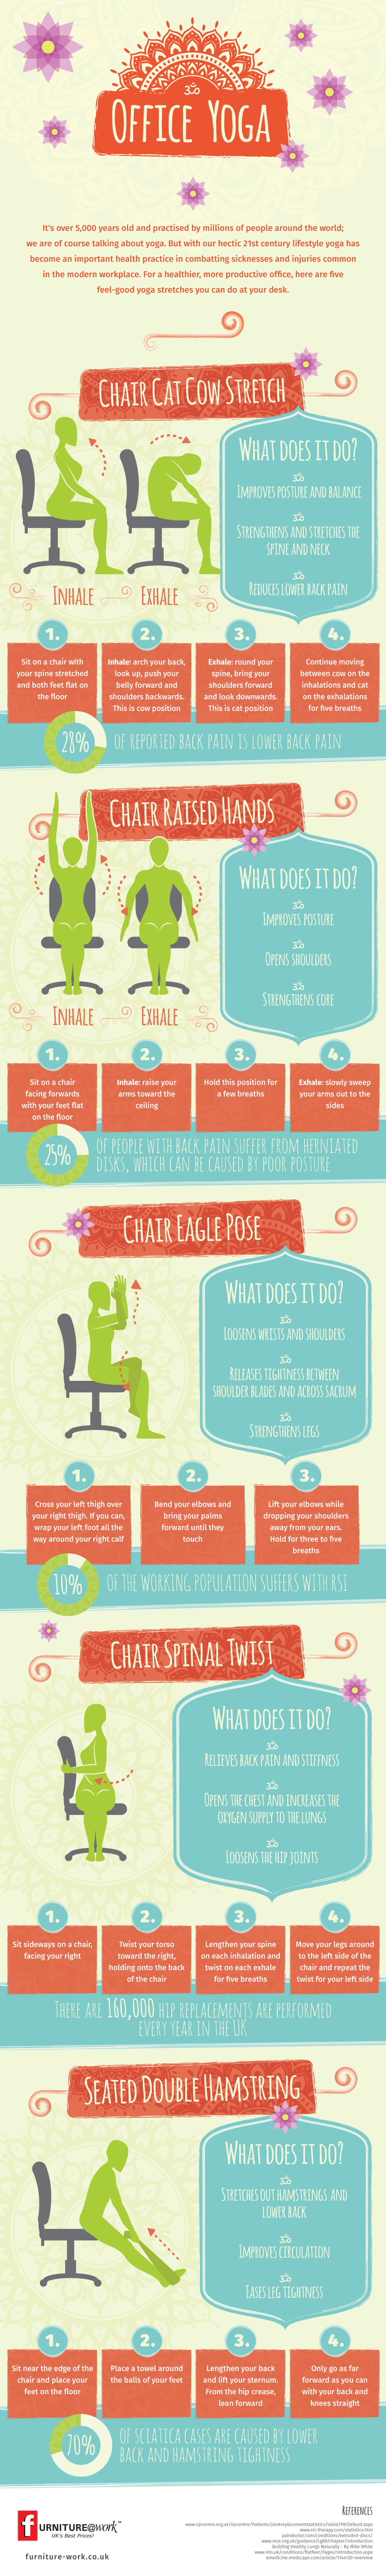 image - officeyoga infographic with poses